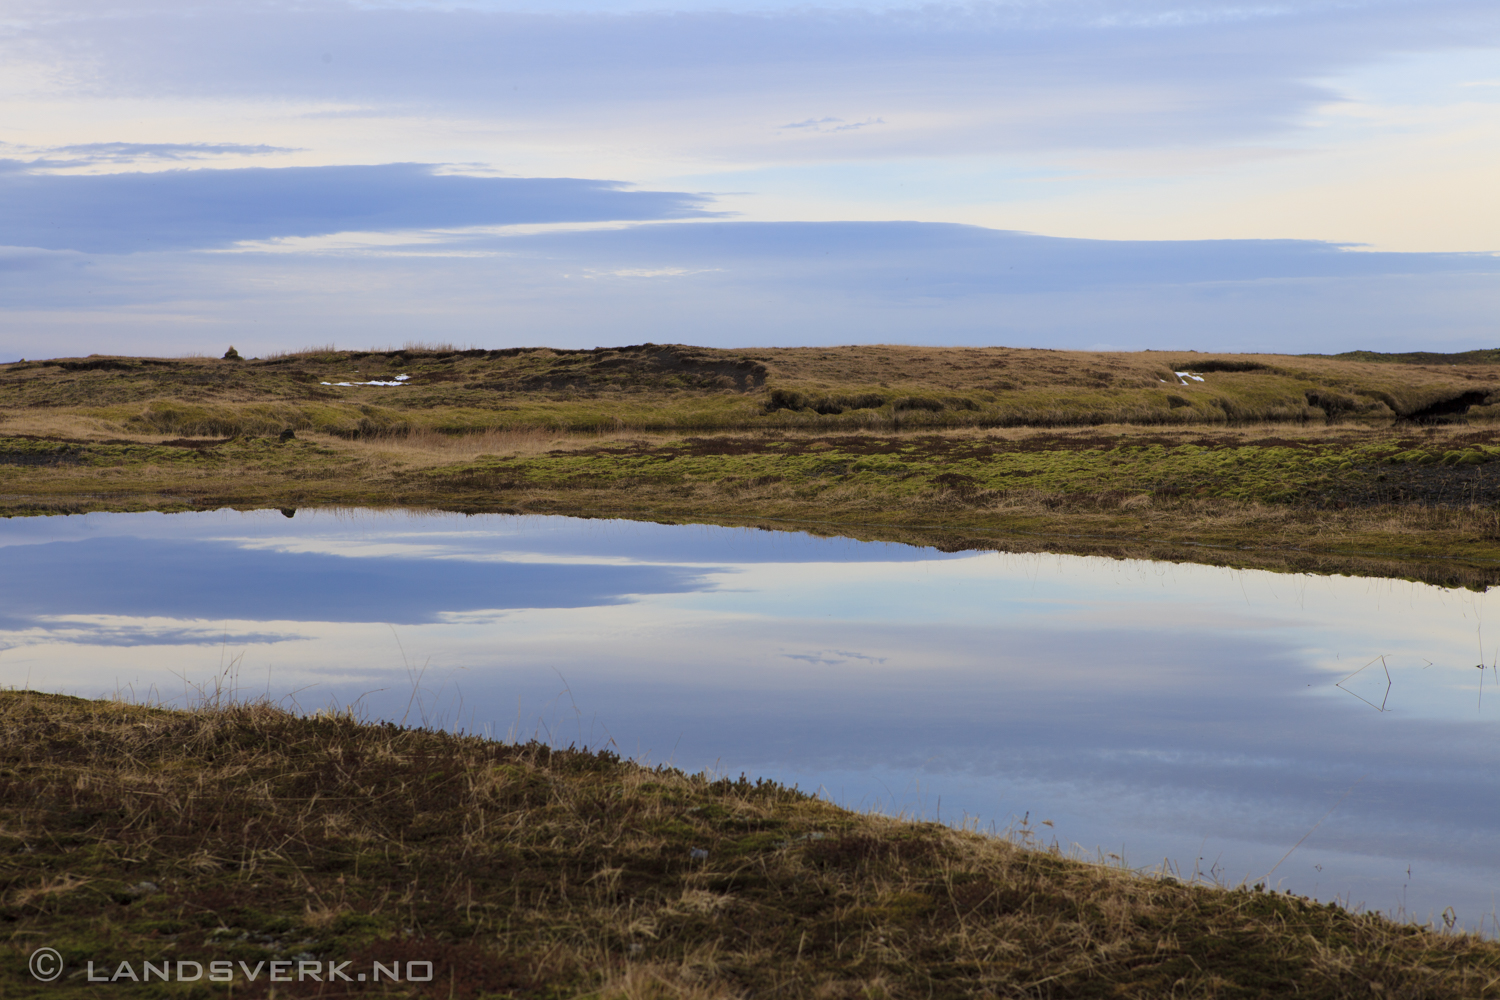 Iceland can also be calm. 

(Canon EOS 5D Mark II / Canon EF 24-70mm f/2.8 L USM)